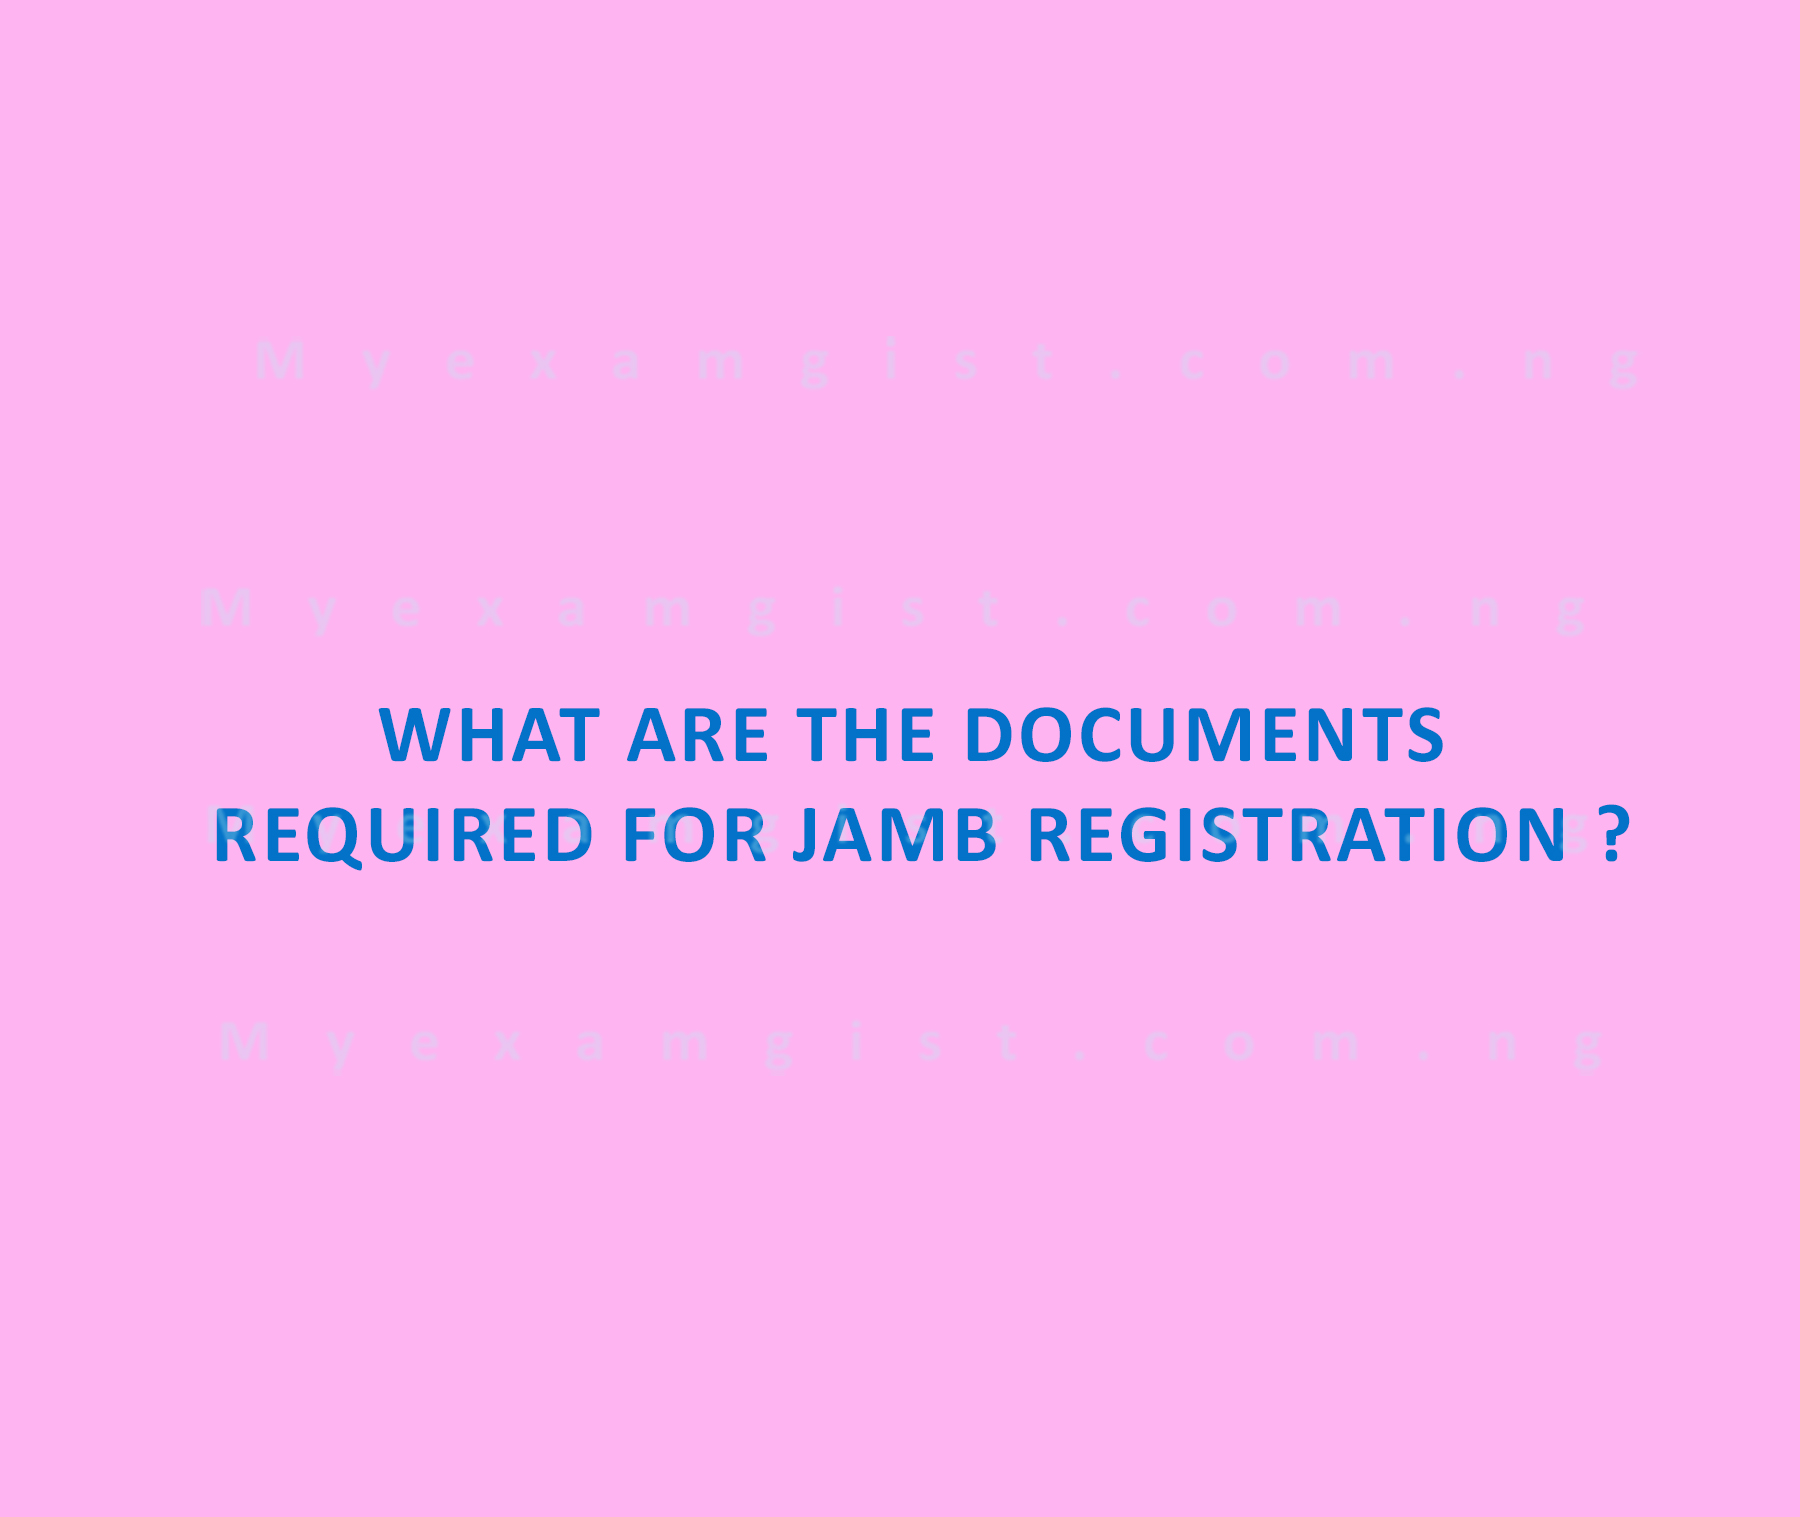 What are the documents required for JAMB registration ?